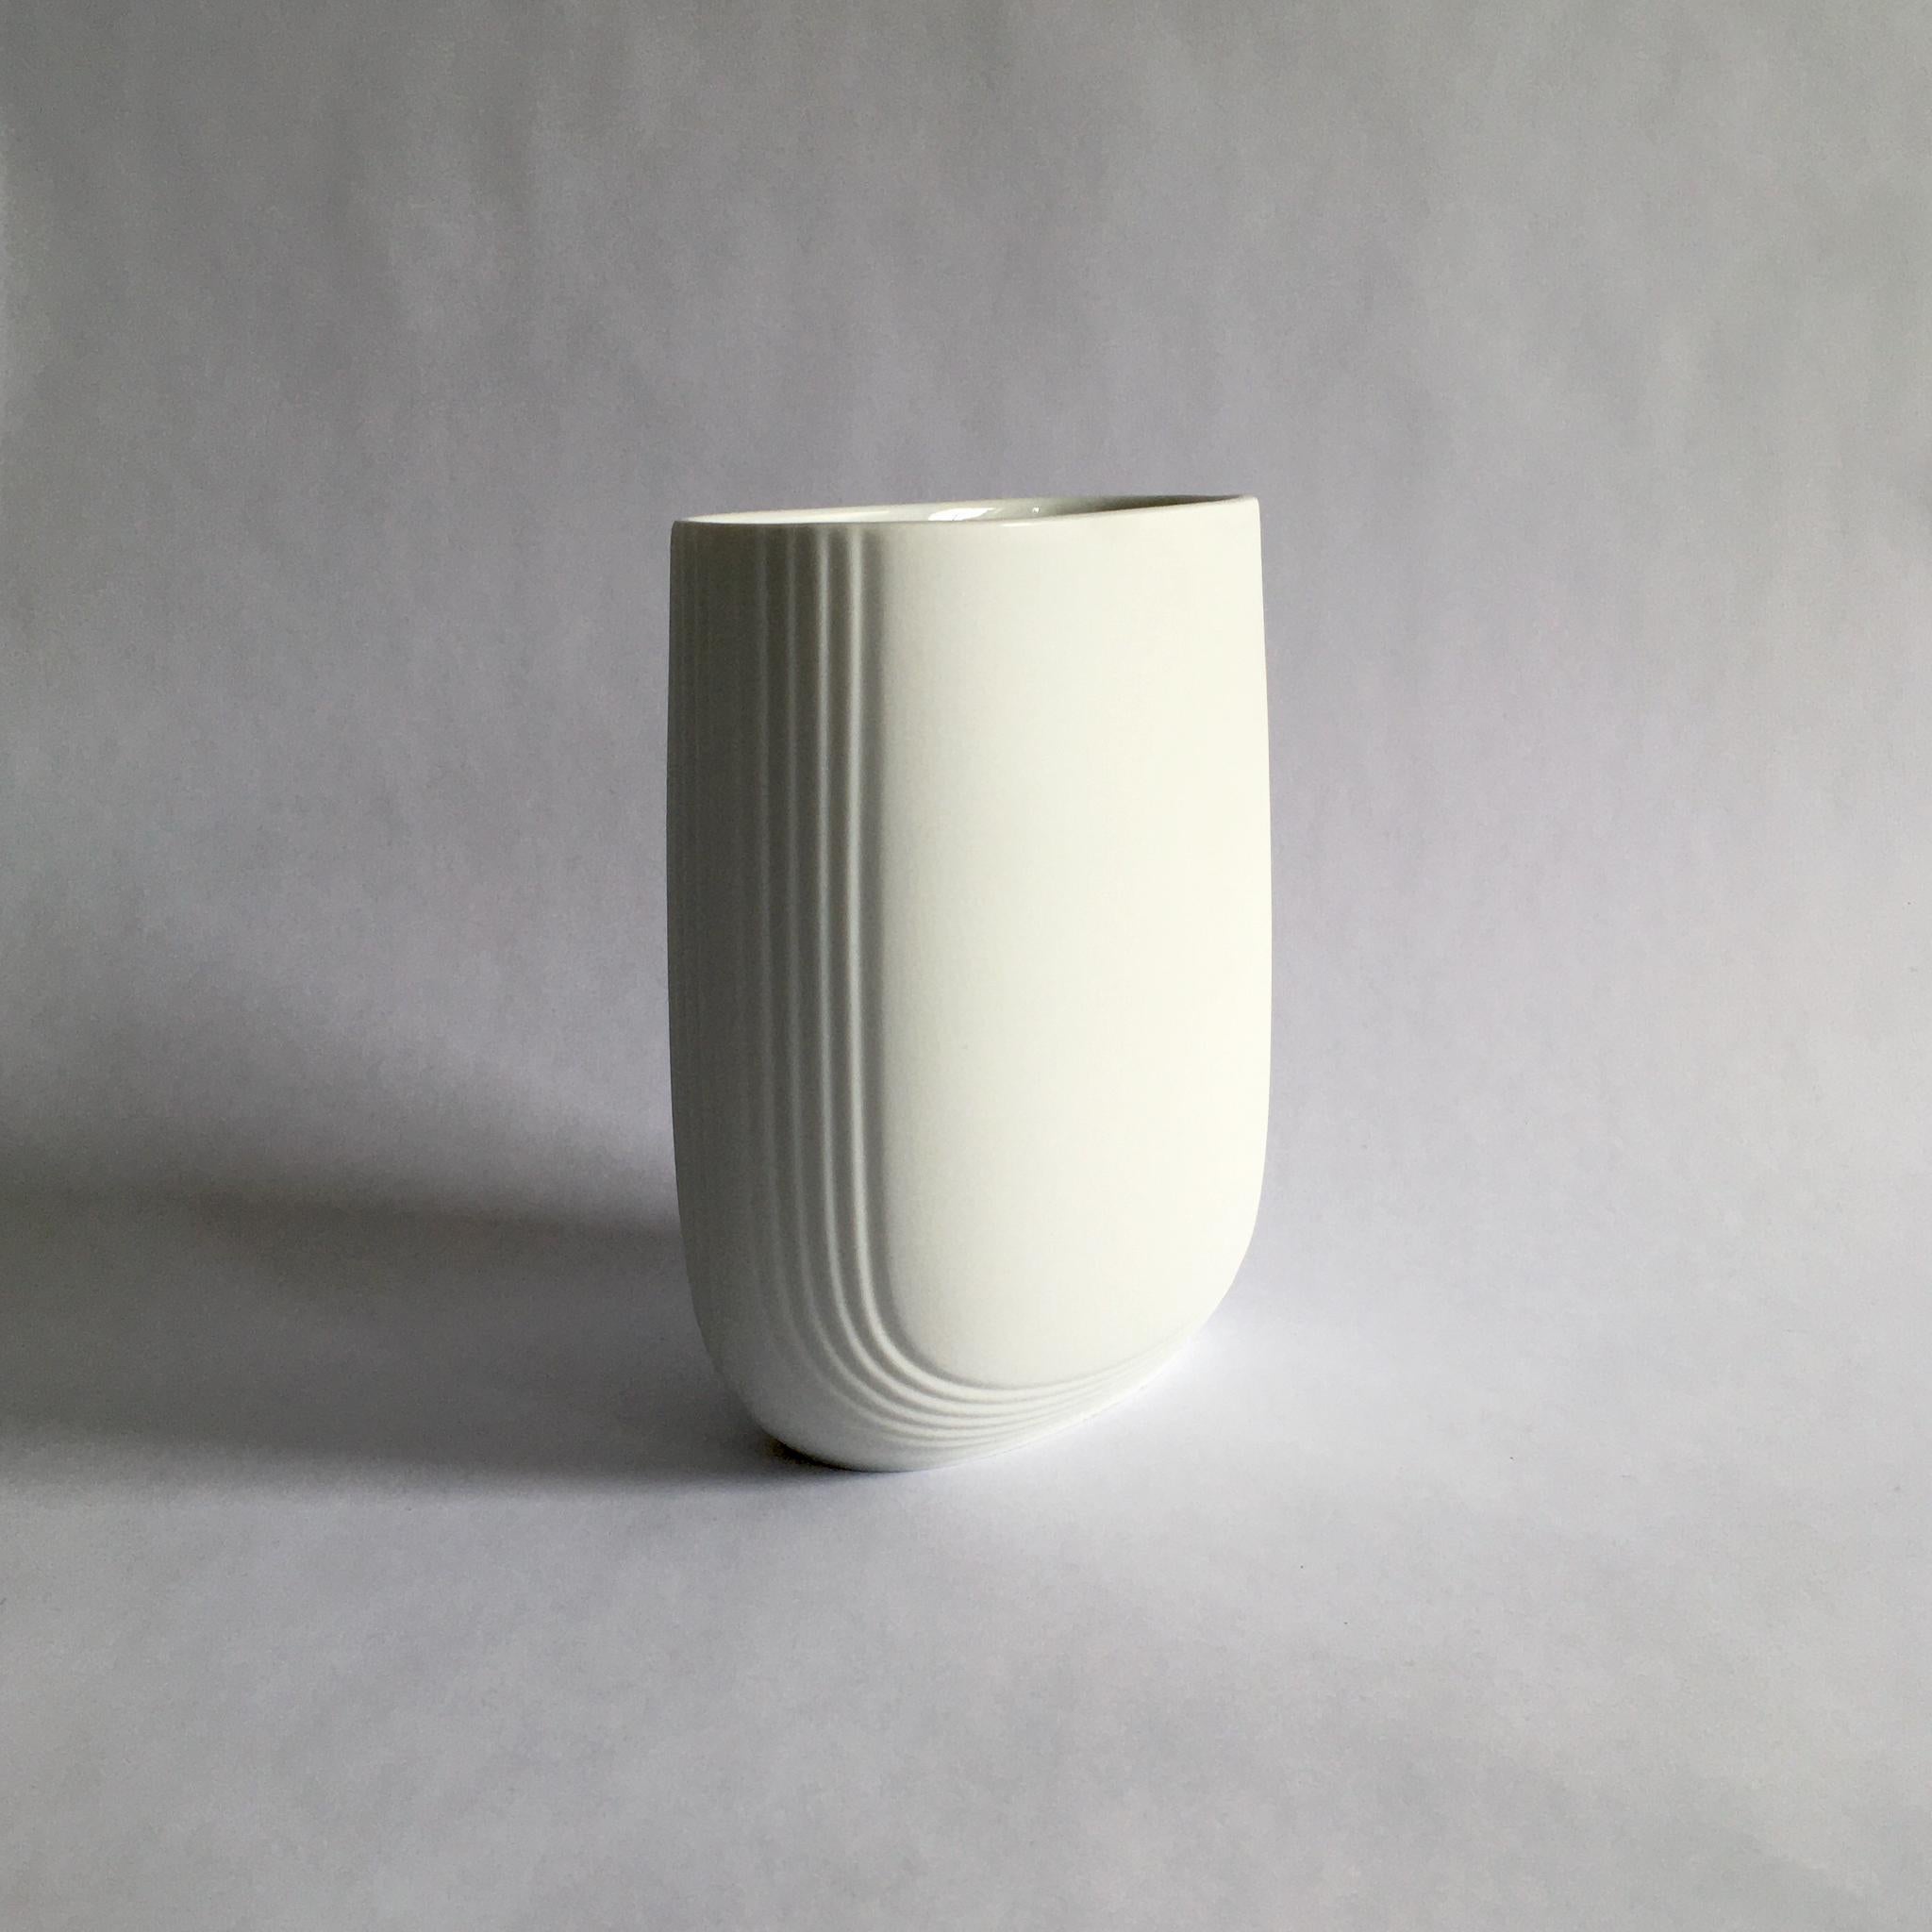 Rosenthal Studio Line white porcelain bisque vase by Christa Hausler-Goltz. Beautiful rounded oblong form, with linear details.

Measurements:
H 5.5